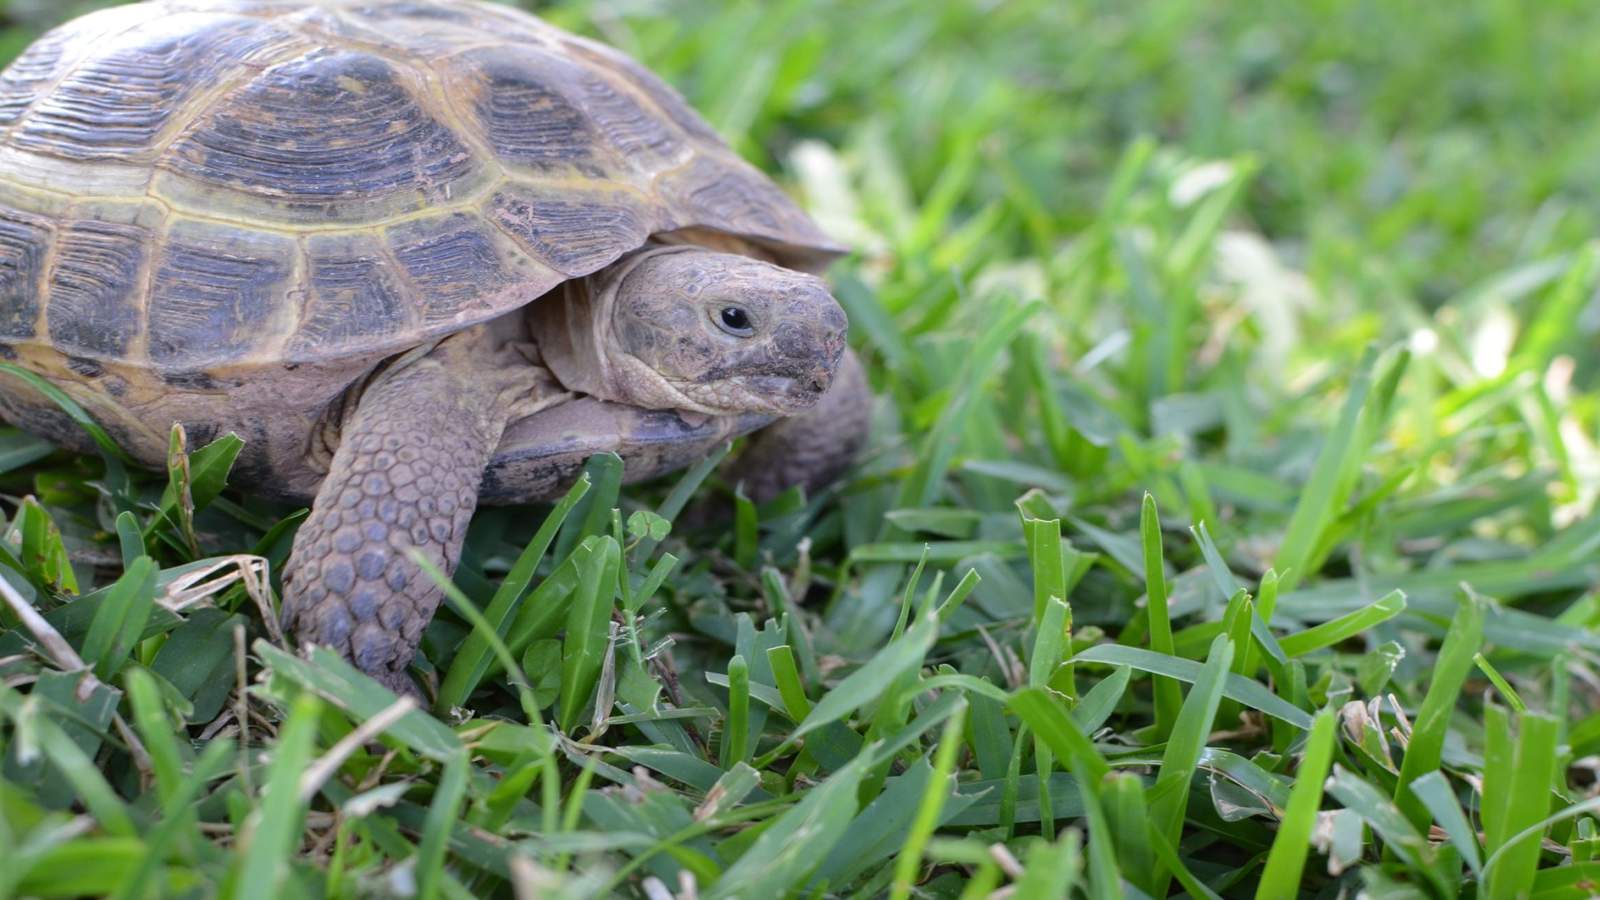 Wandering tortoise creates special connection between families